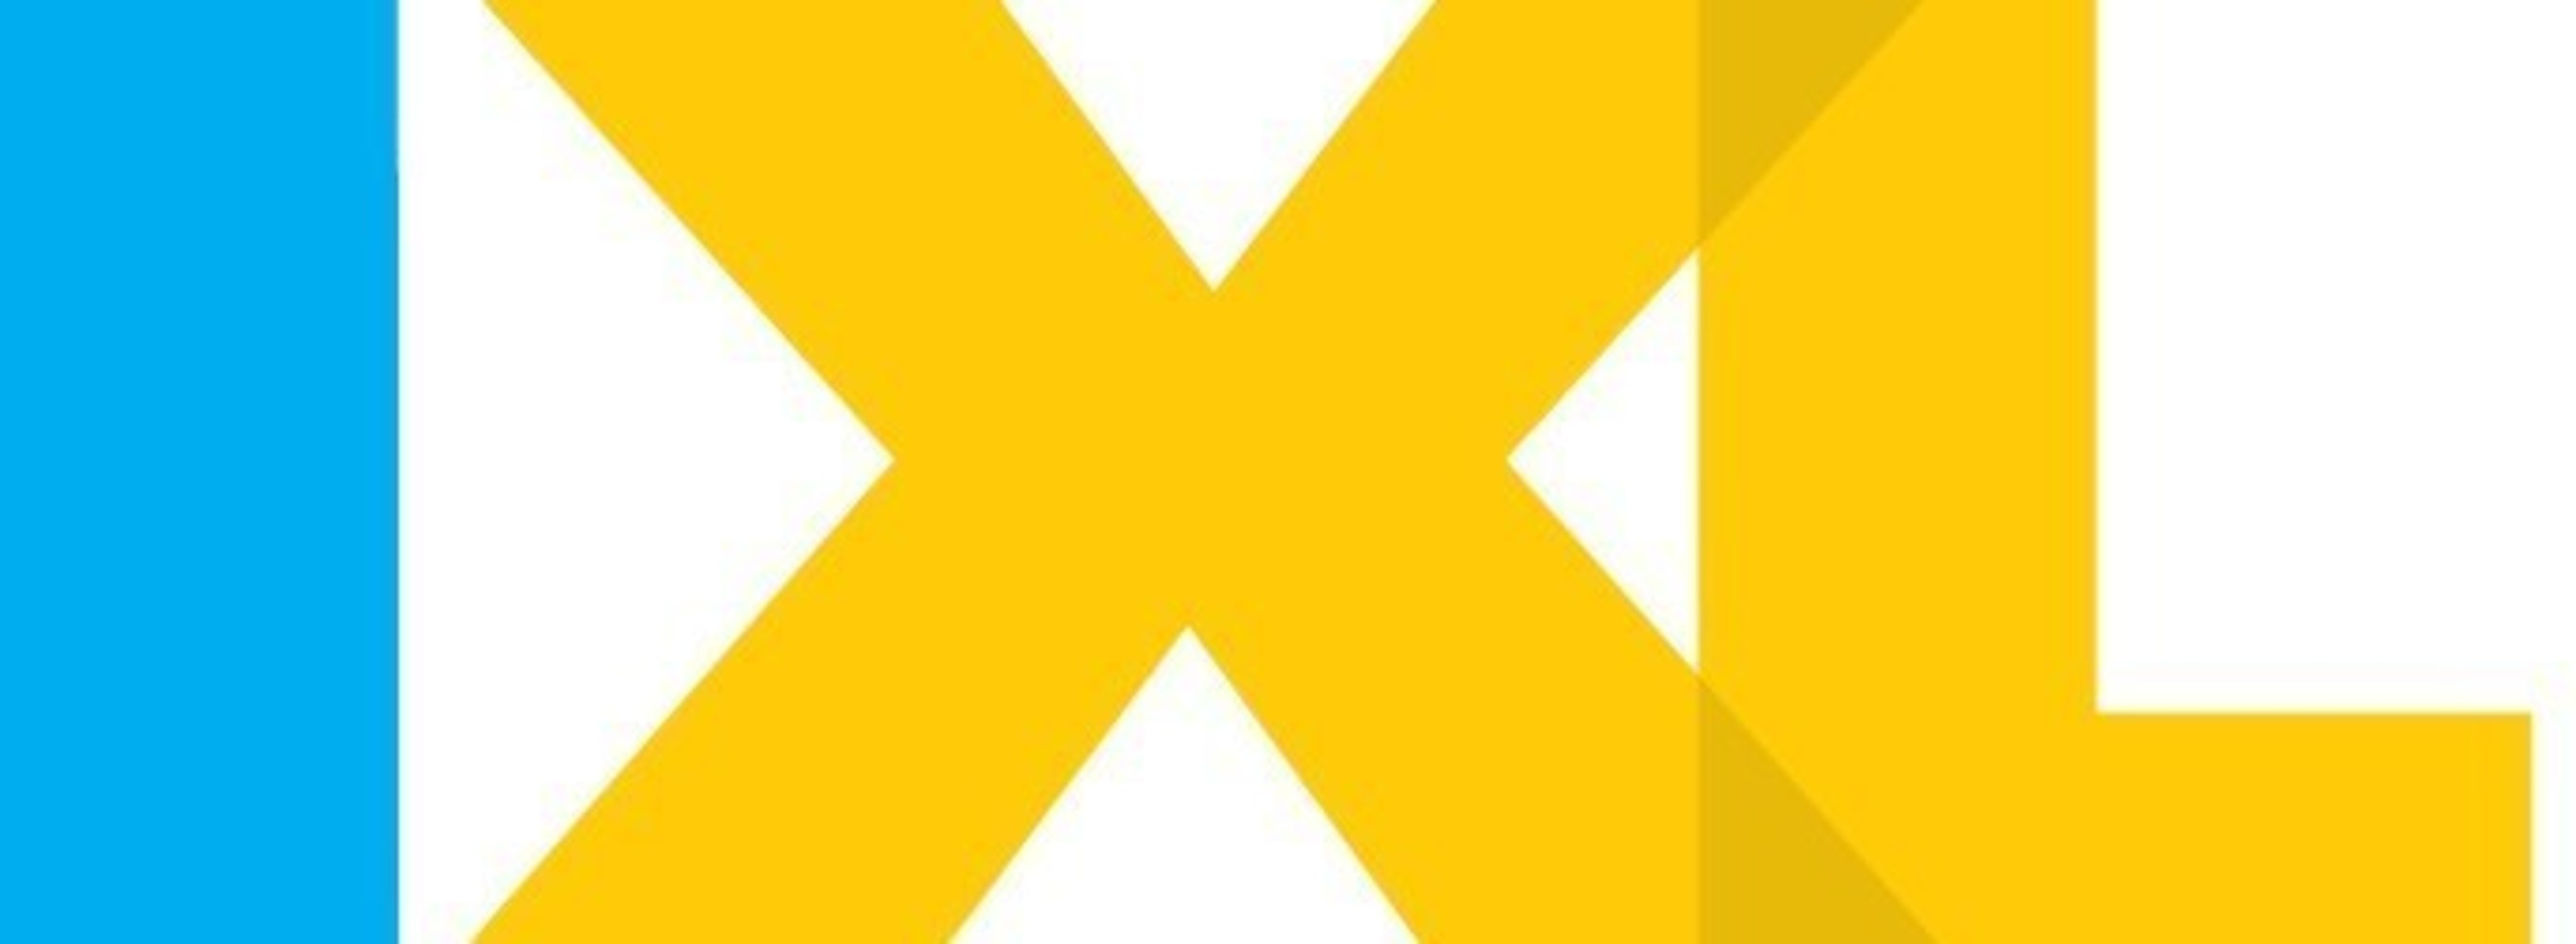 IXL Introduces Personalized System to Help Students